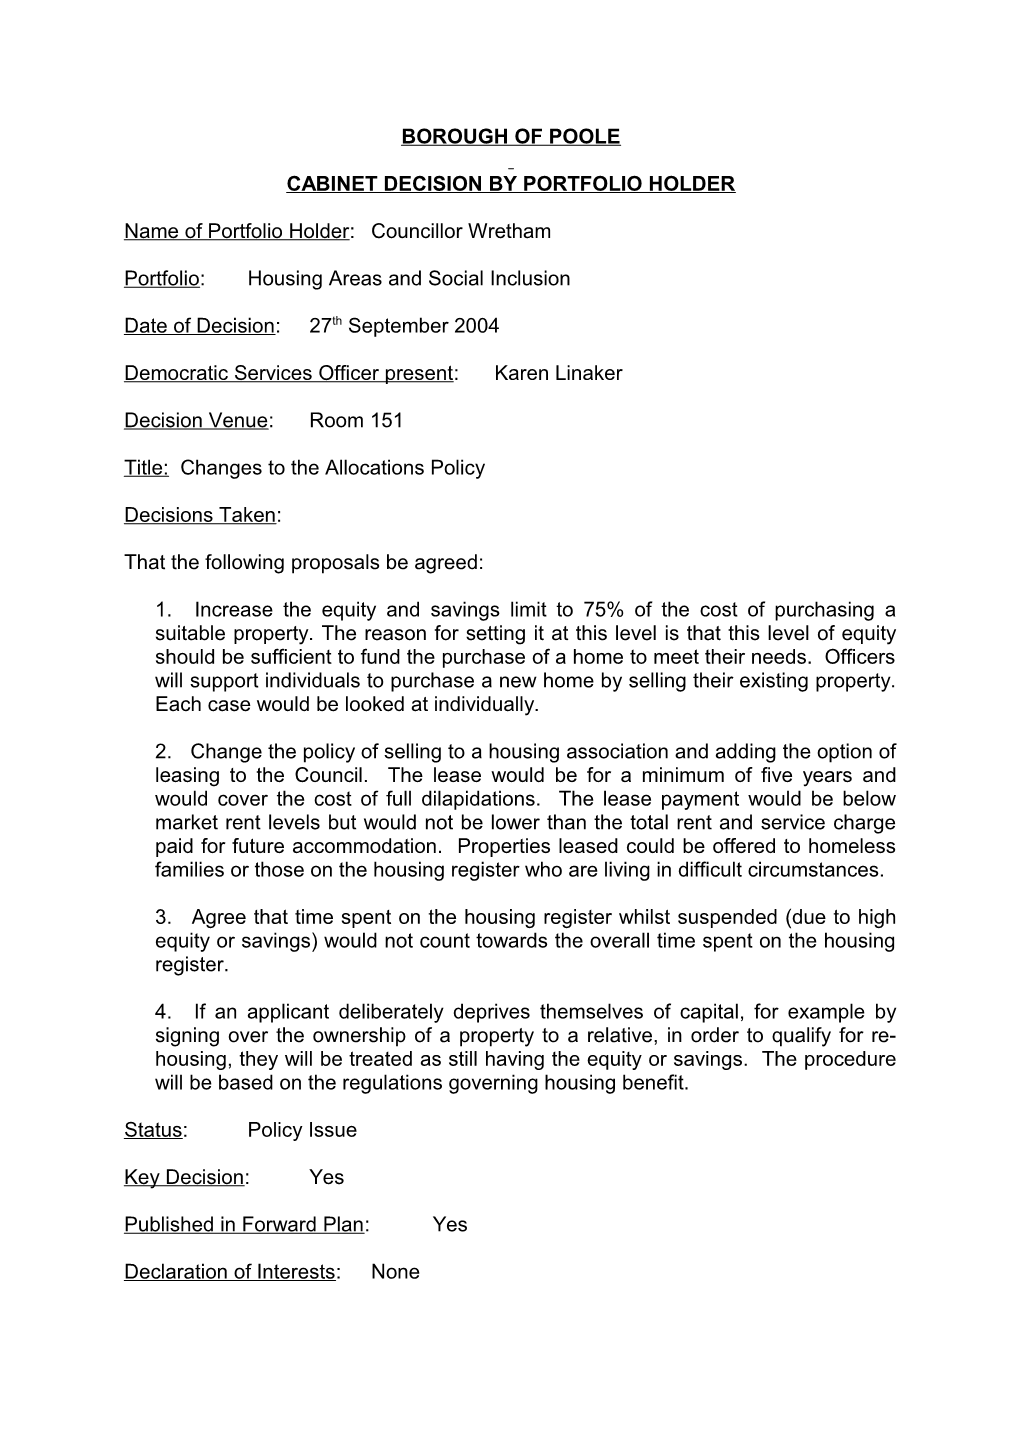 PFD - Councillor Wretham - 27 September 2004 - Approve Revised Housing Allocations Policy